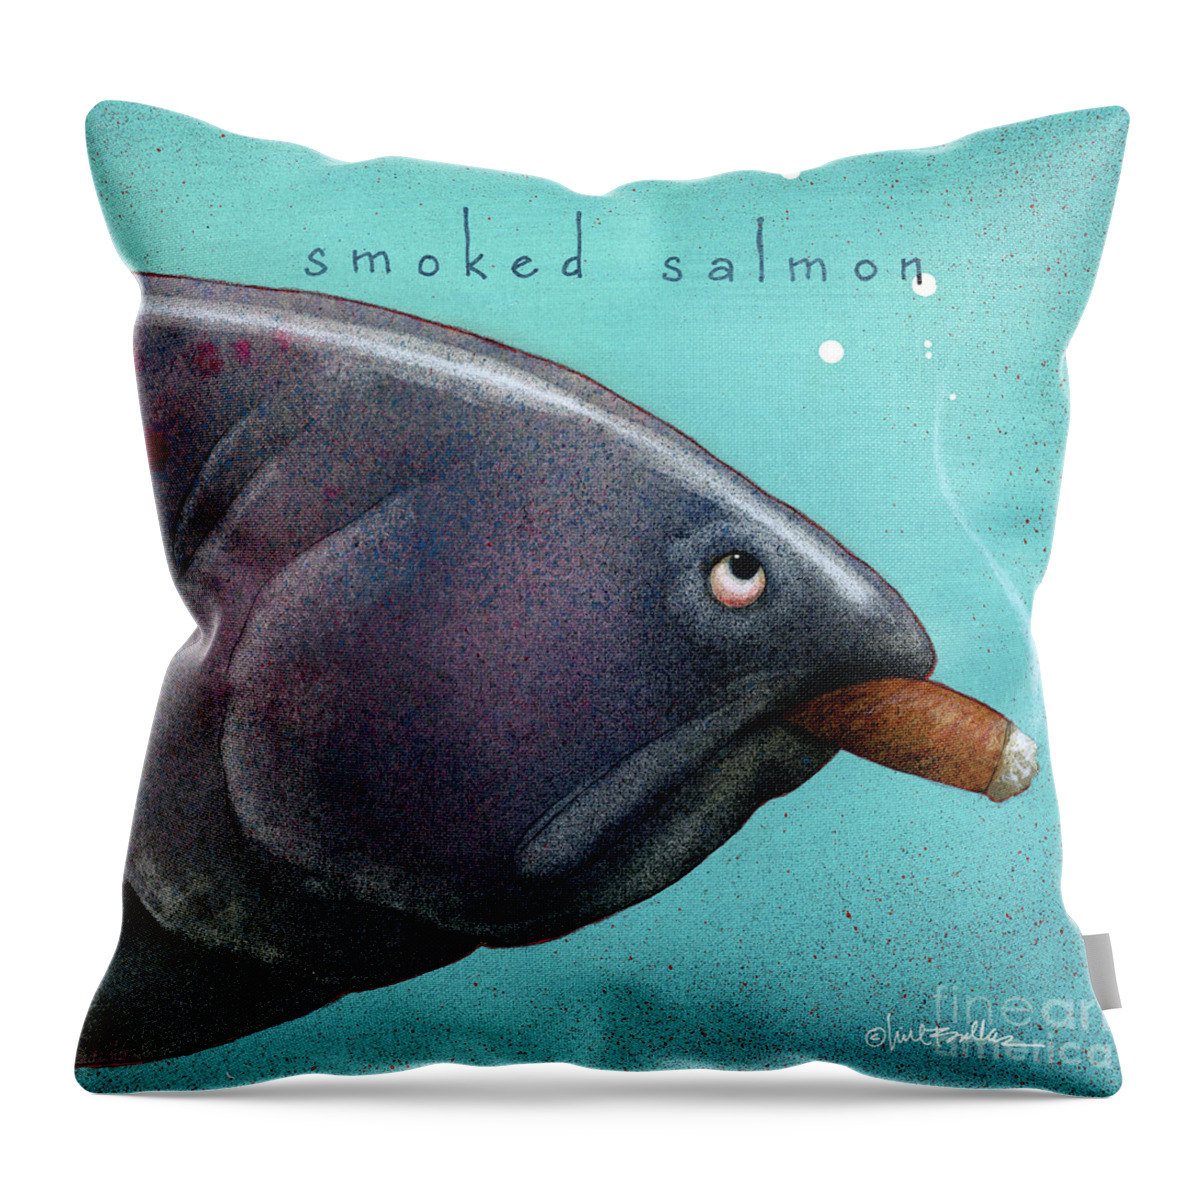 Smoked Salmon Throw Pillow featuring the painting Smoked salmon by Will Bullas